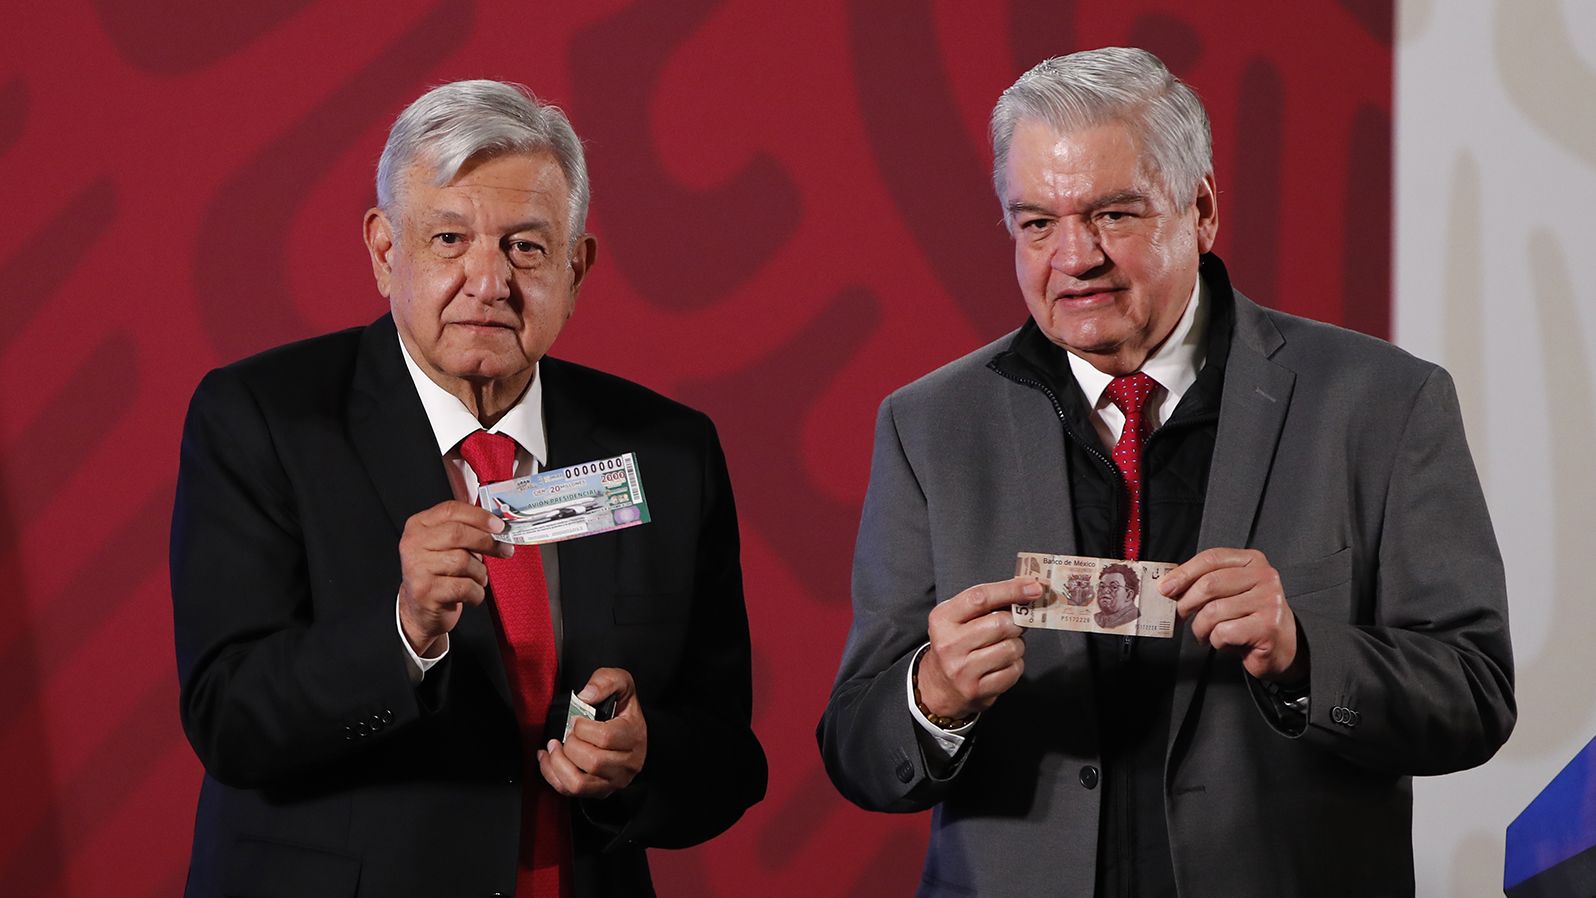 The President of Mexico, Andres Manuel Lopez Obrador, left, shows his ticket for the raffle of the presidential plane next to the general director of the National Lottery, Ernesto Prieto Ortega, on March 3, 2020.